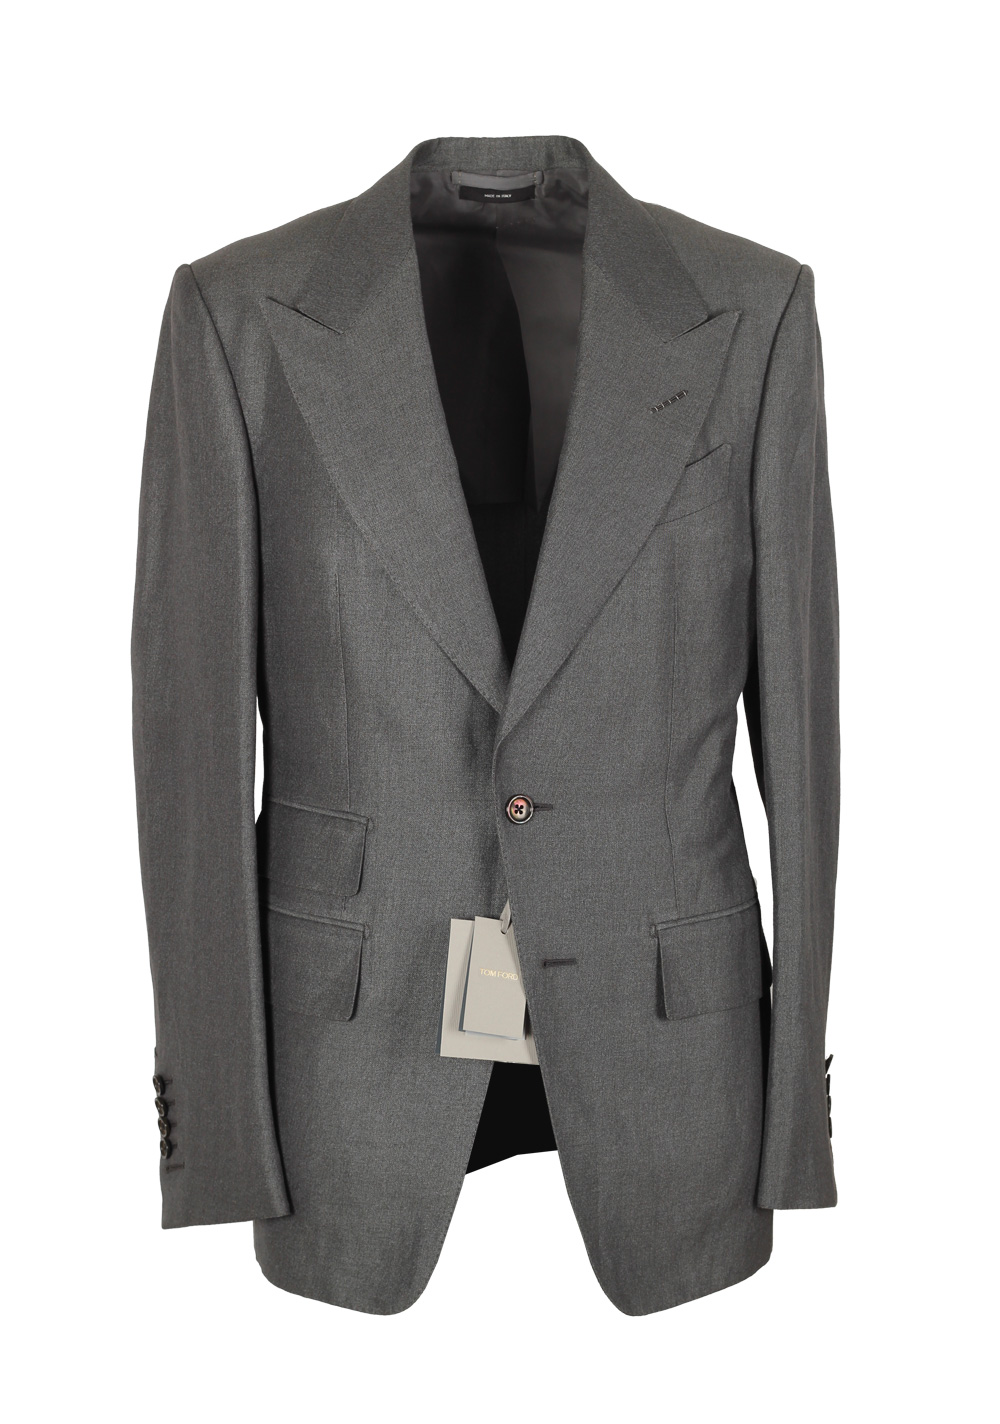 TOM FORD Shelton Gray Suit Size 46 / 36R U.S. In Silk Linen | Costume ...